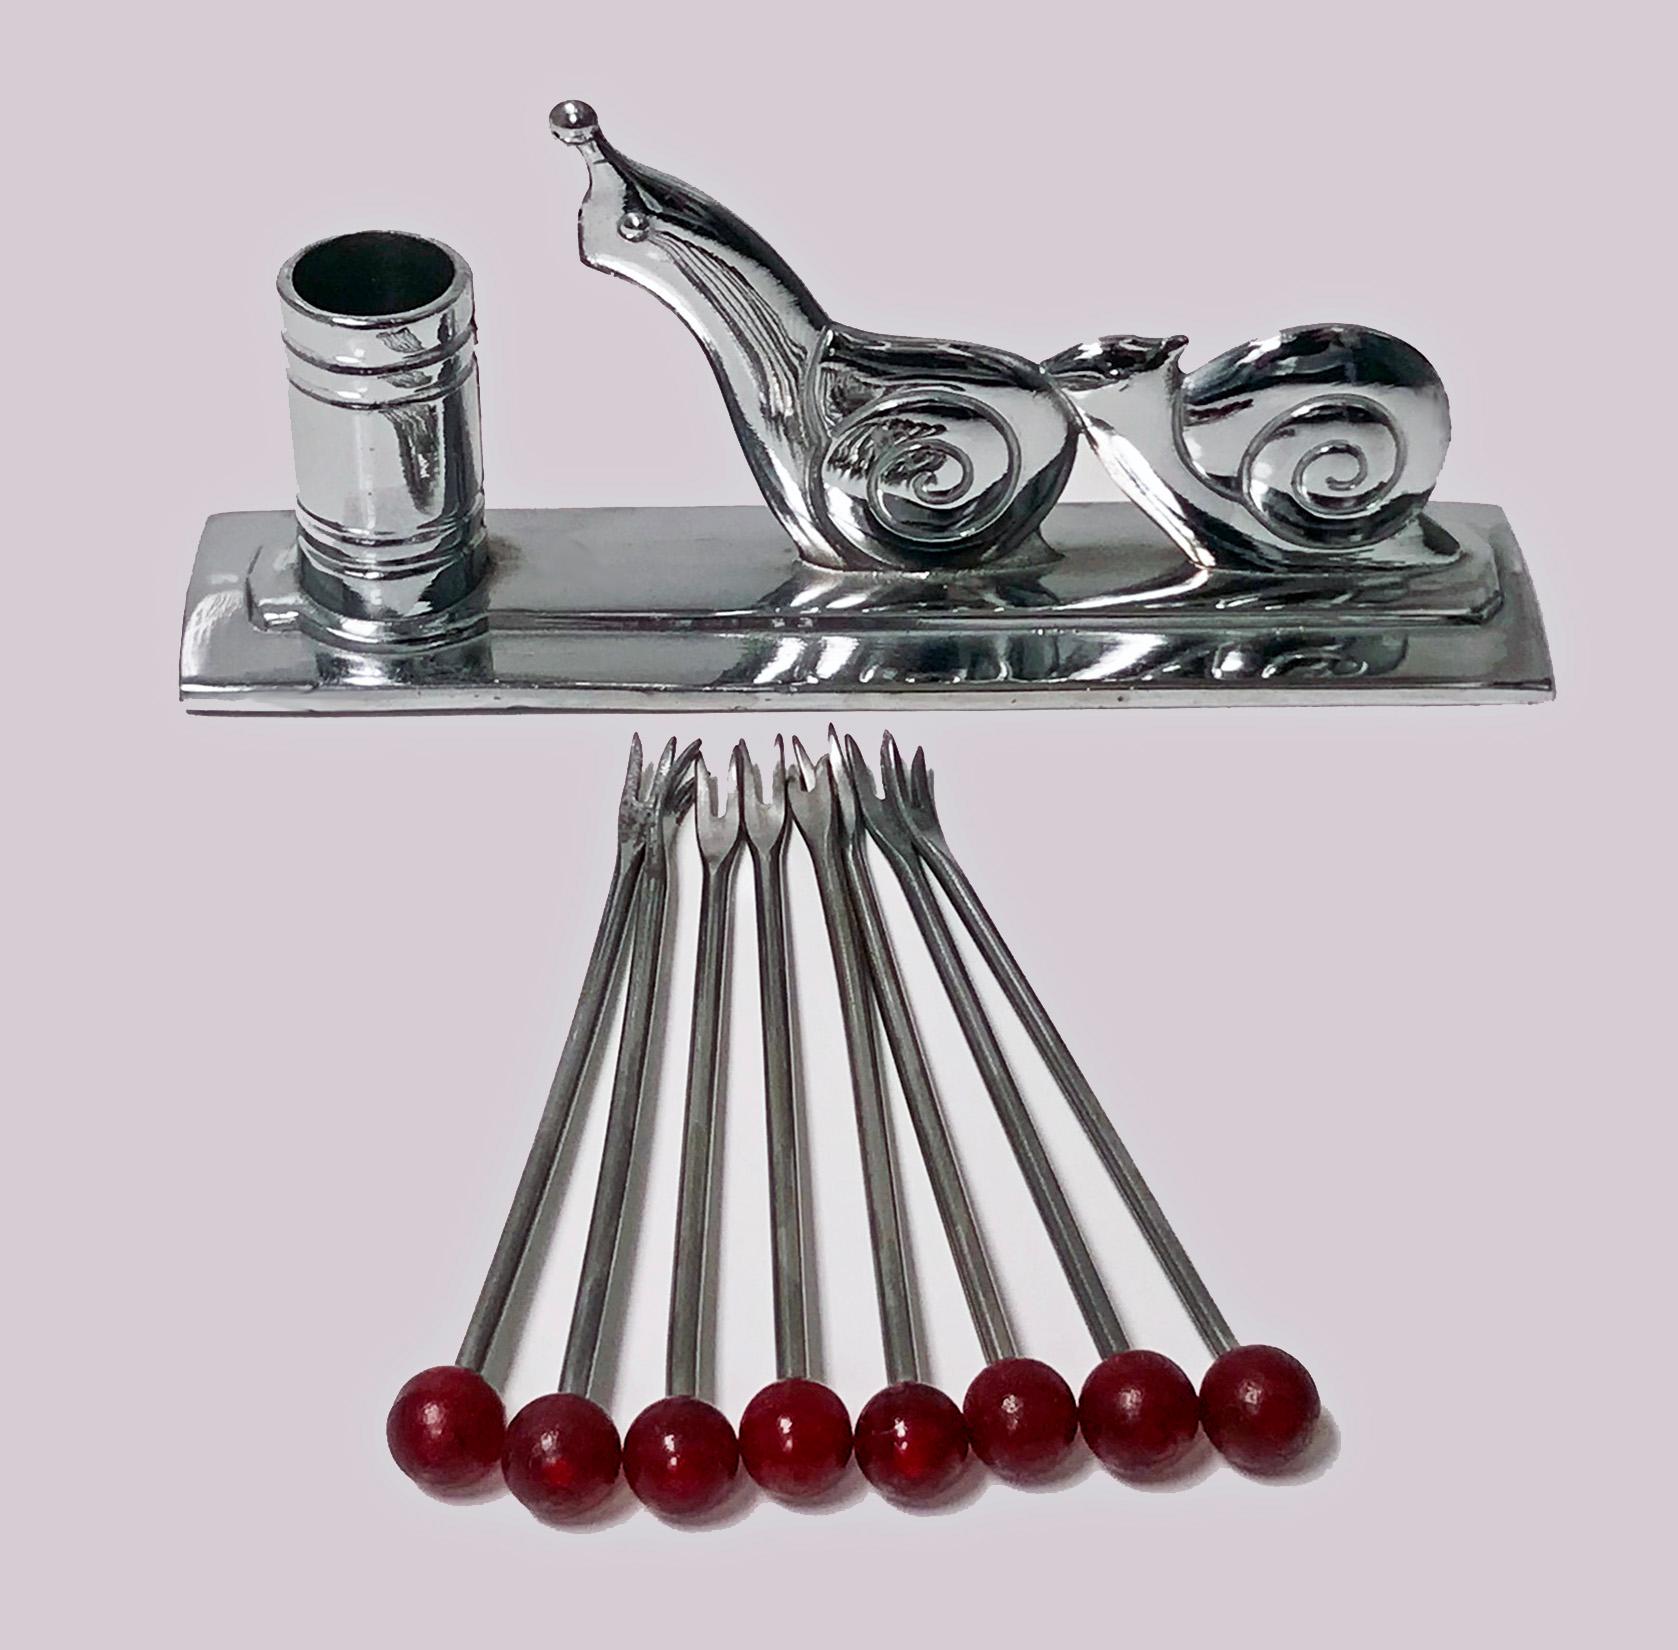 Art Deco French chrome cocktail set designed by Benjamin Rabier, circa 1930. The mount in the form of escargots with eight red Bakelite handle cocktail sticks. Measures: 5.0 x 1.20 x 2.25 inches (4.0 including sticks).